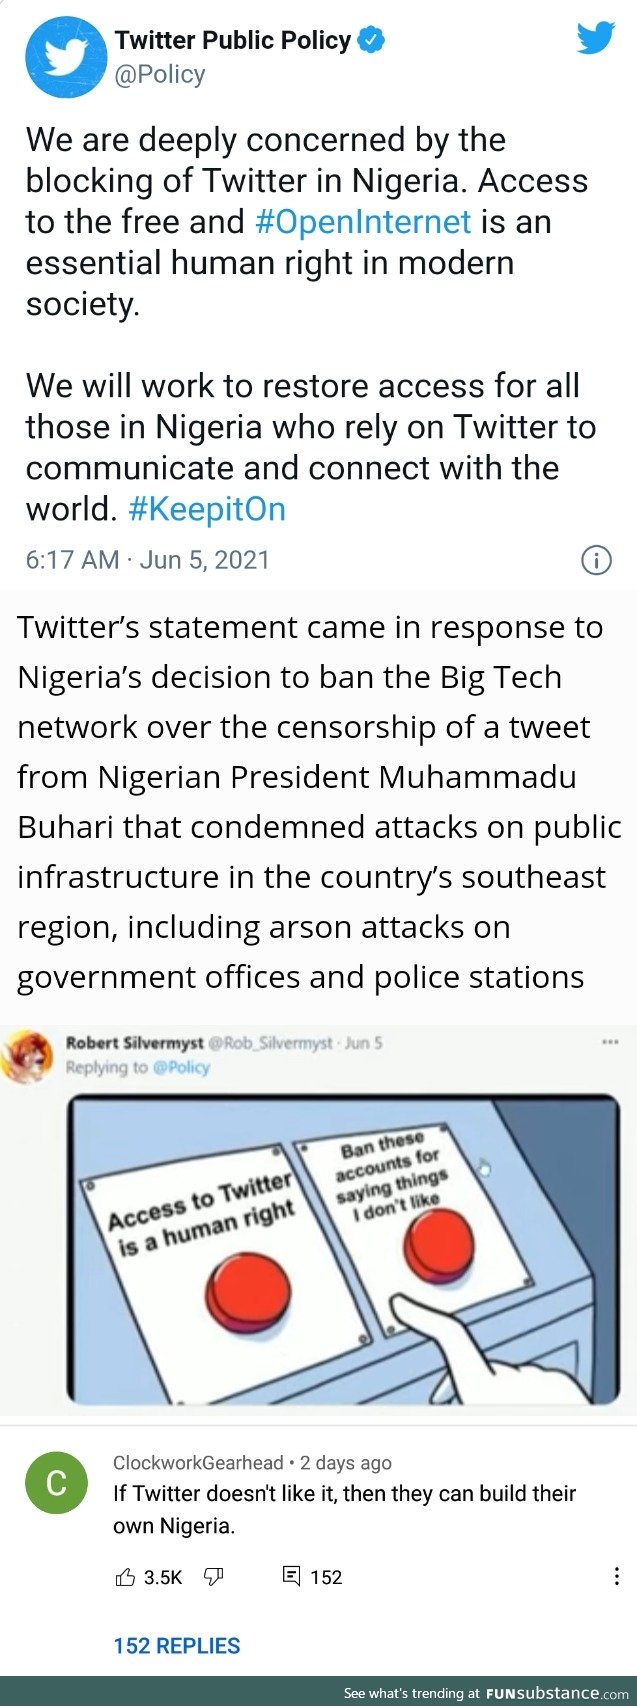 Twitter should just build their own Nigeria